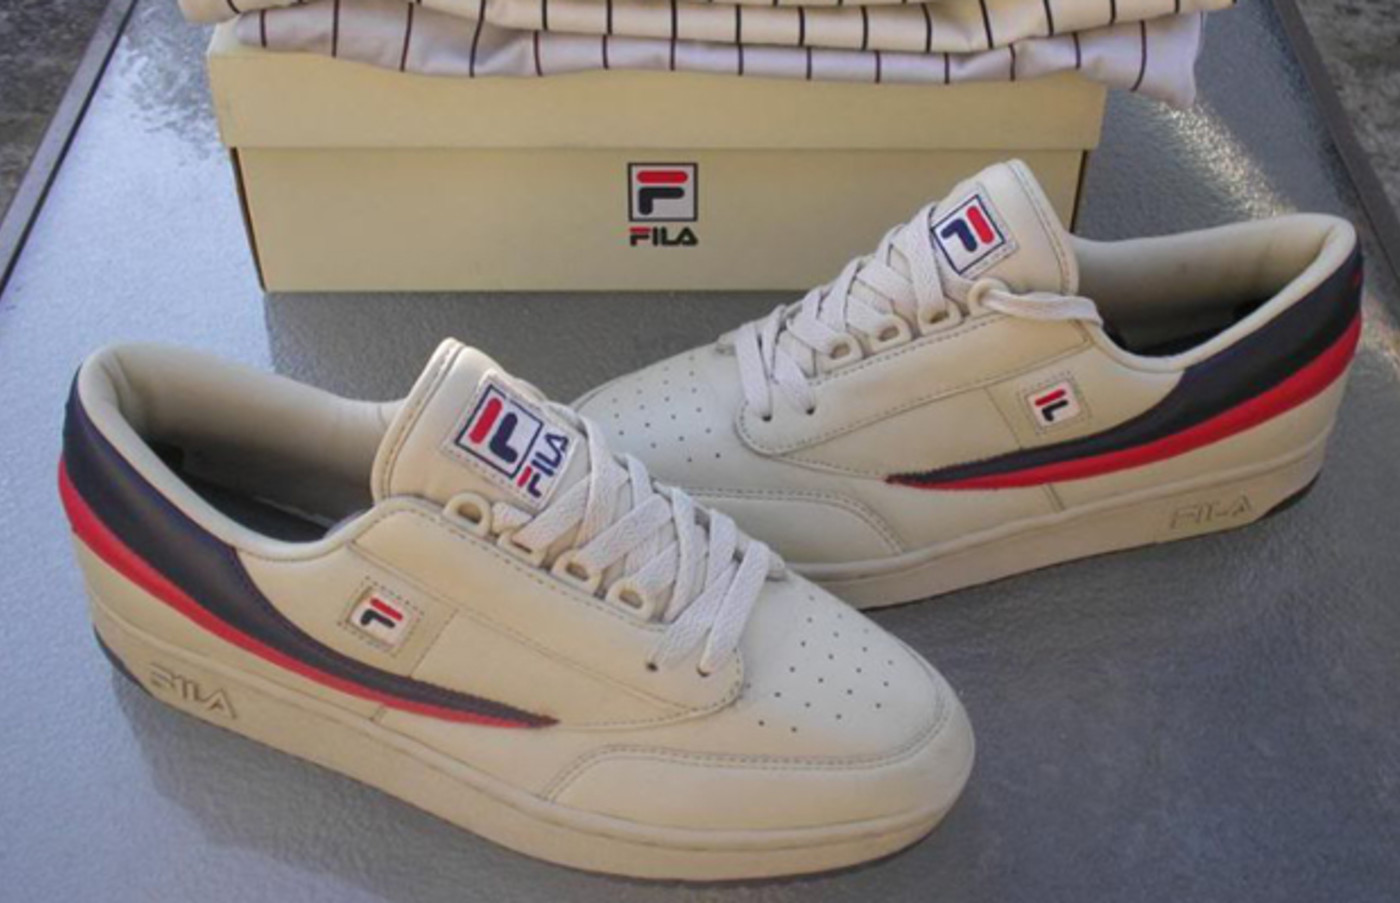 fila shoes from the 80's